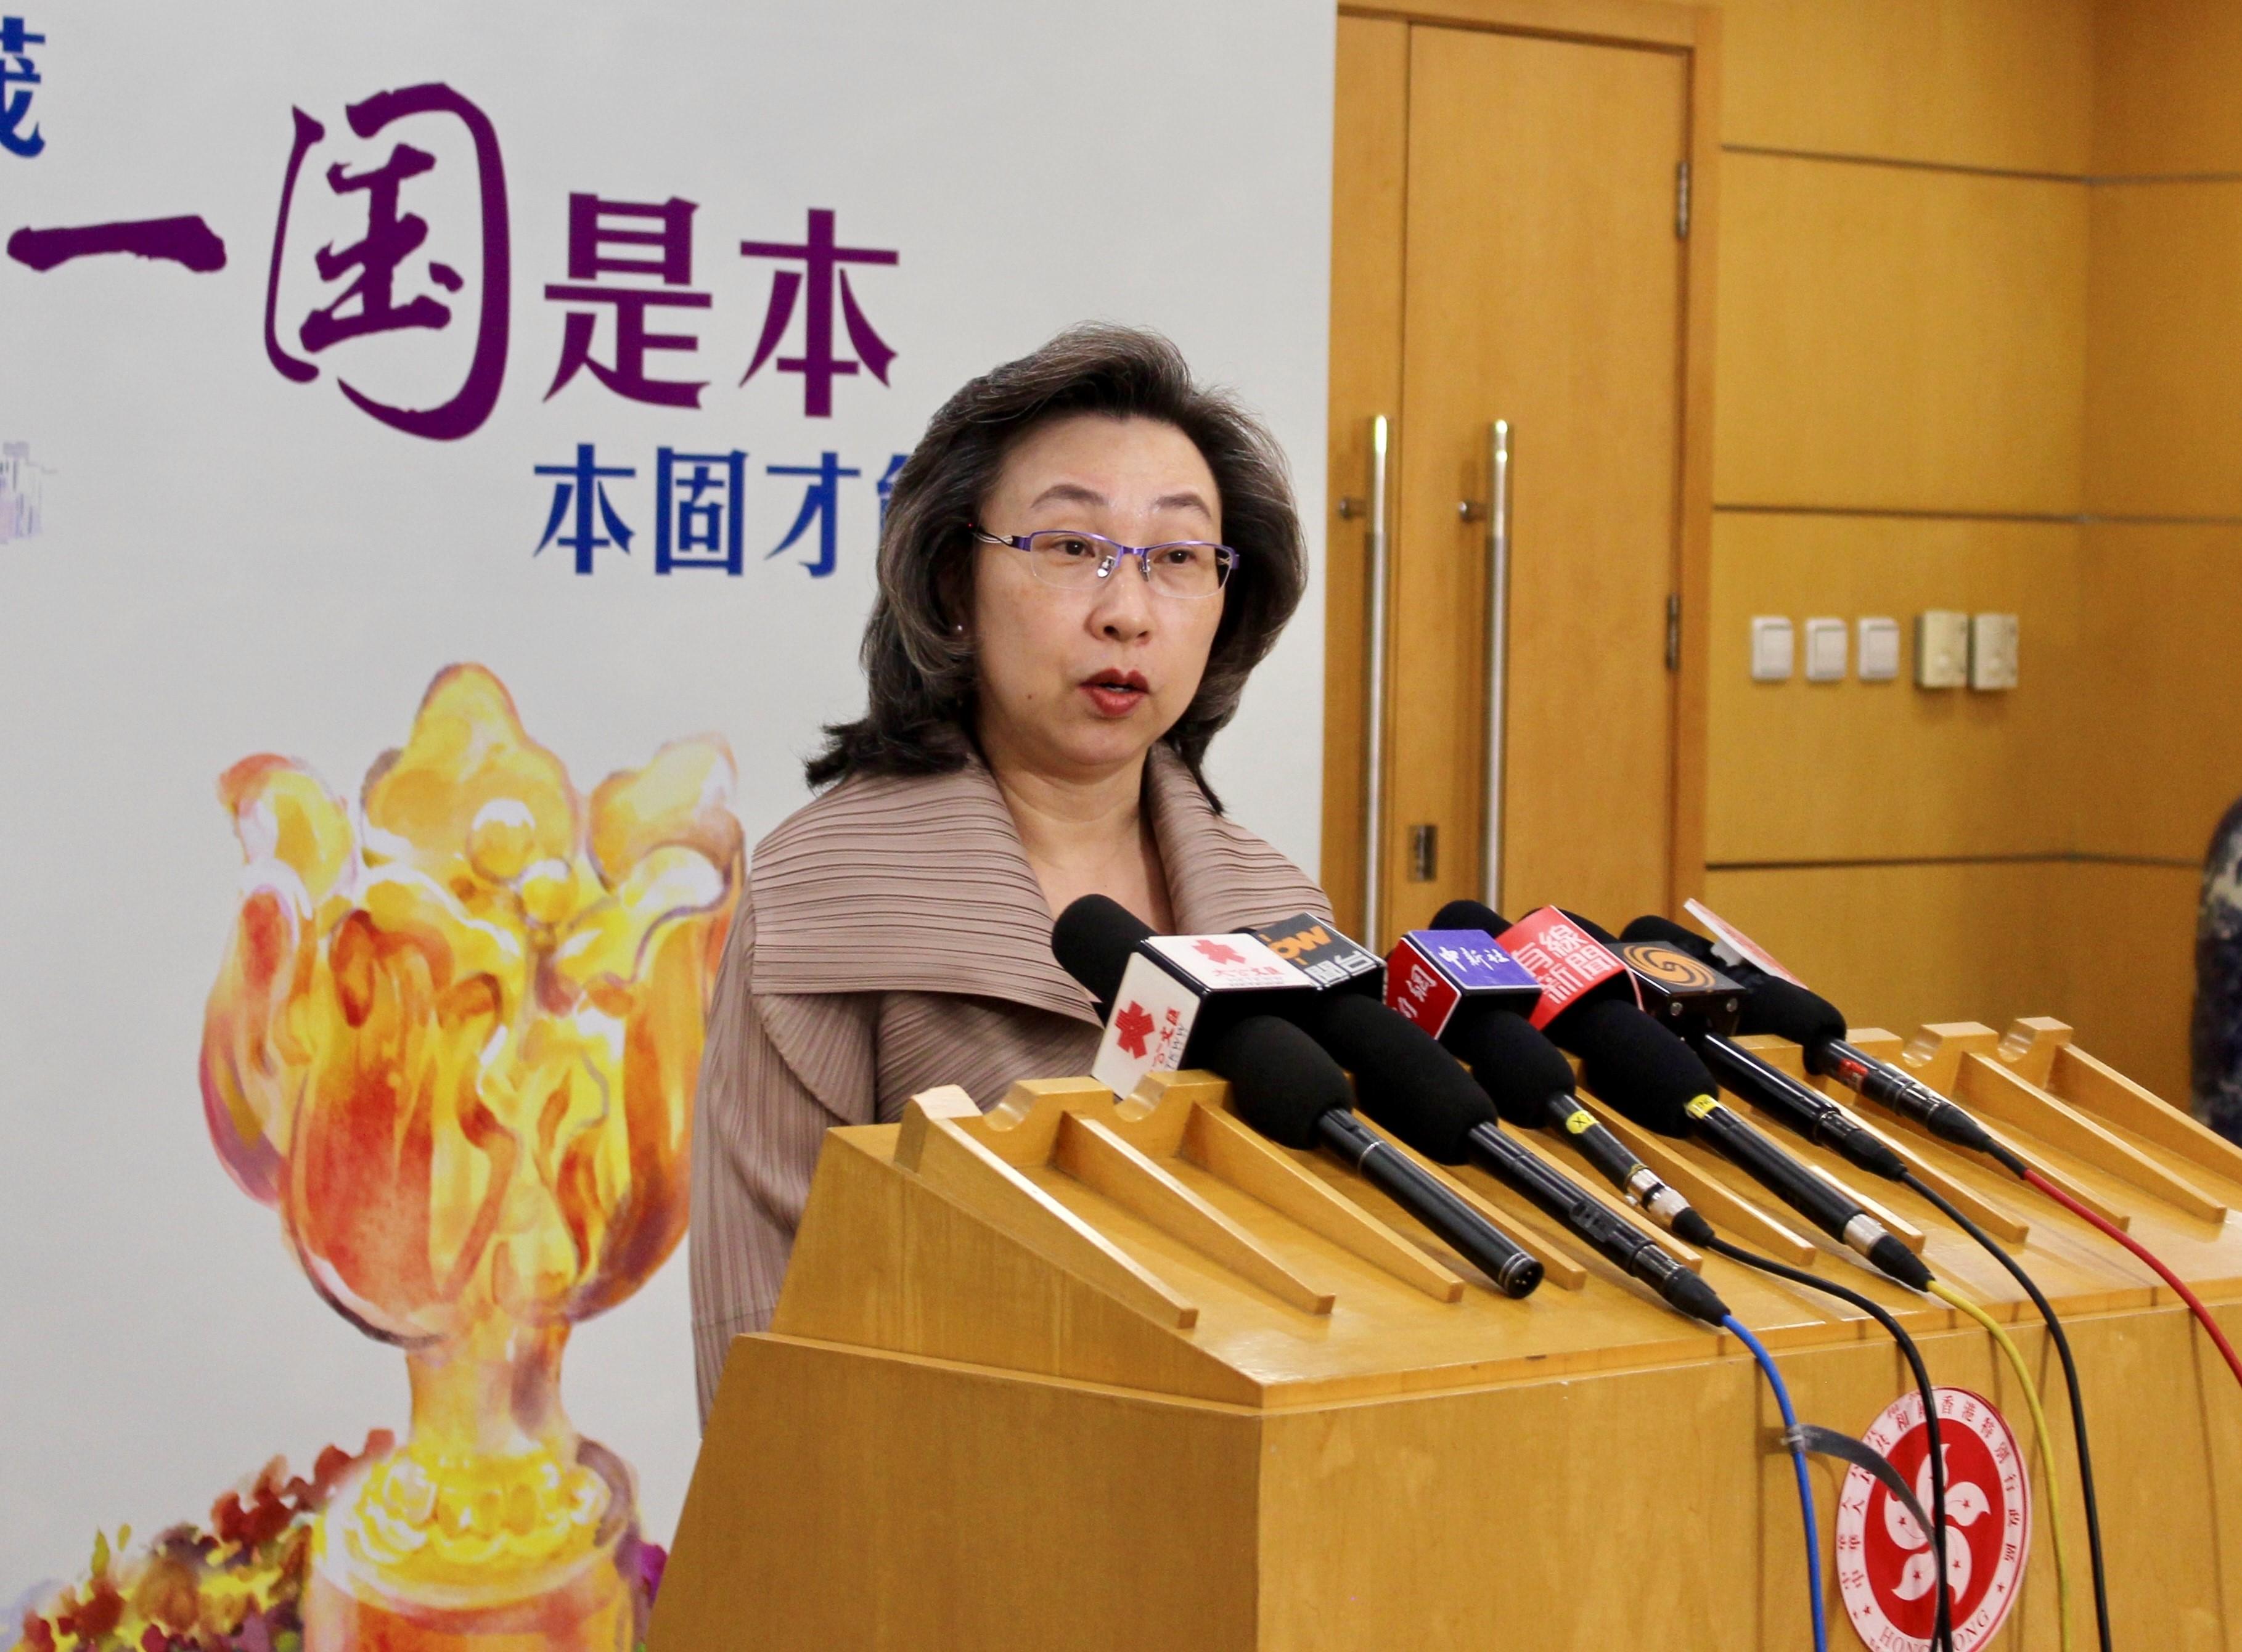 The Secretary for the Civil Service, Mrs Ingrid Yeung, meets the media in Beijing today (June 27) to conclude the study and duty visit programme for Permanent Secretaries and Heads of Departments in Beijing.